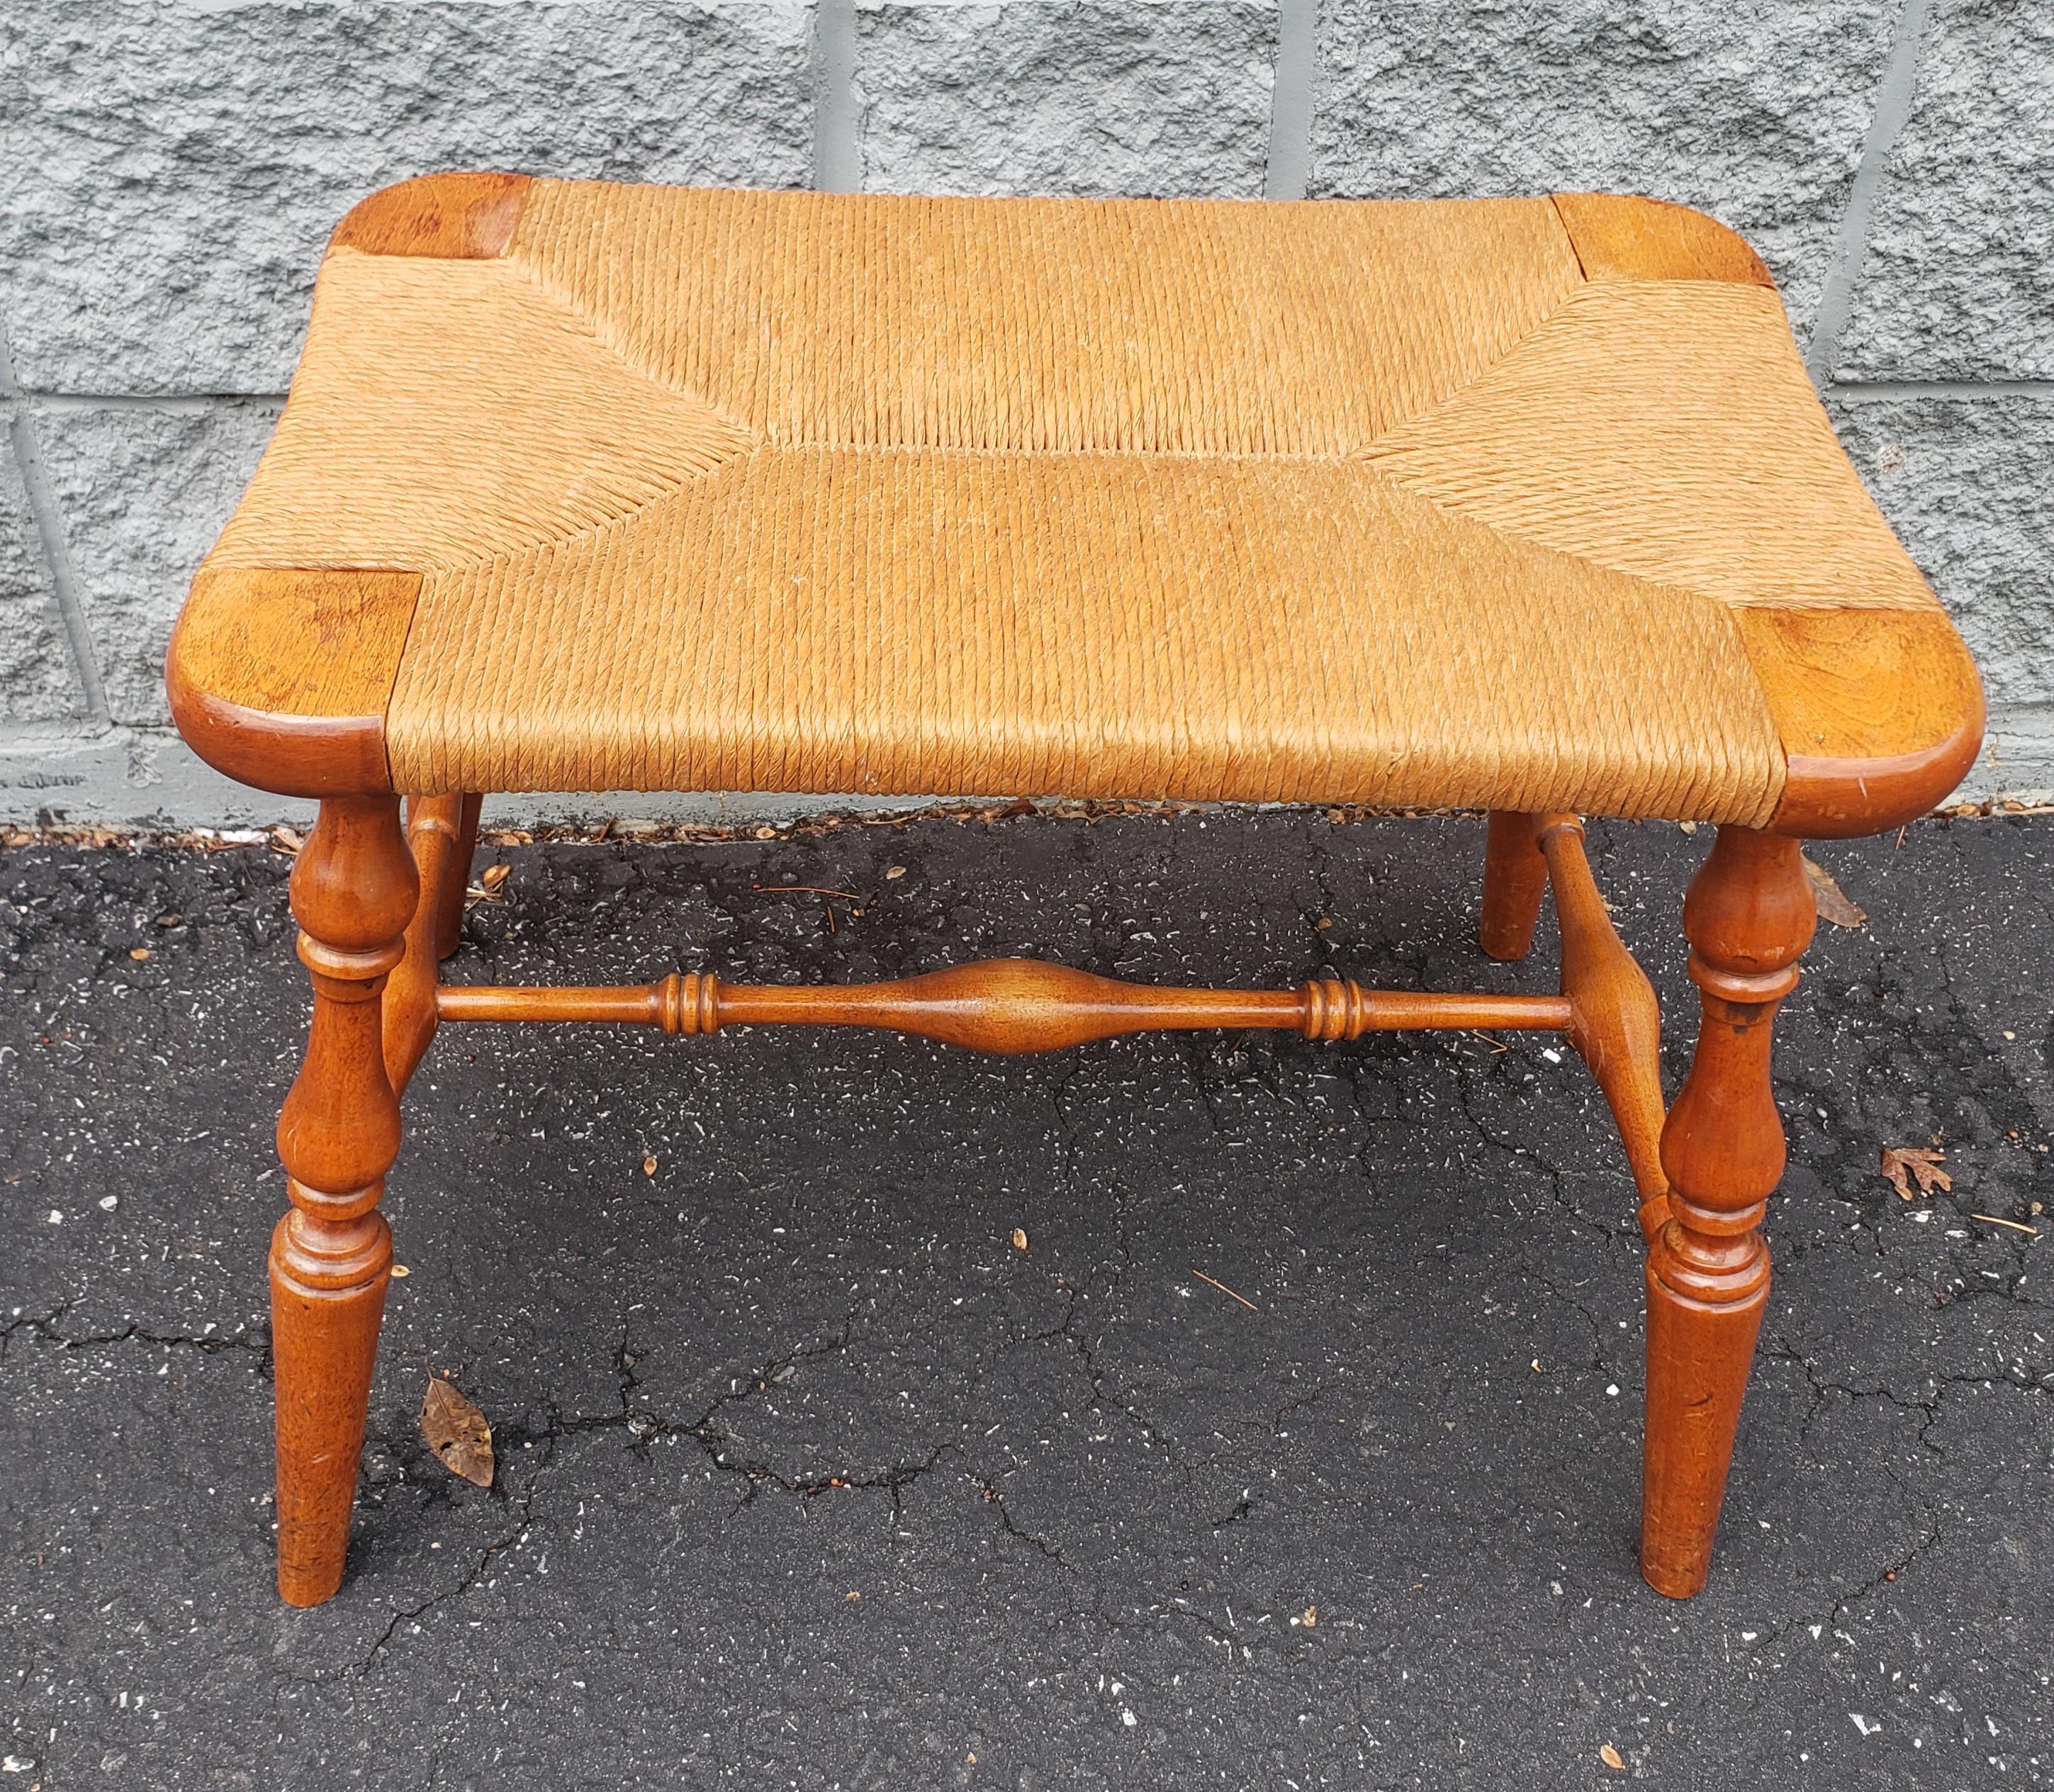 Midcentury Turned Maple and Seat Seat Bench In Good Condition For Sale In Germantown, MD